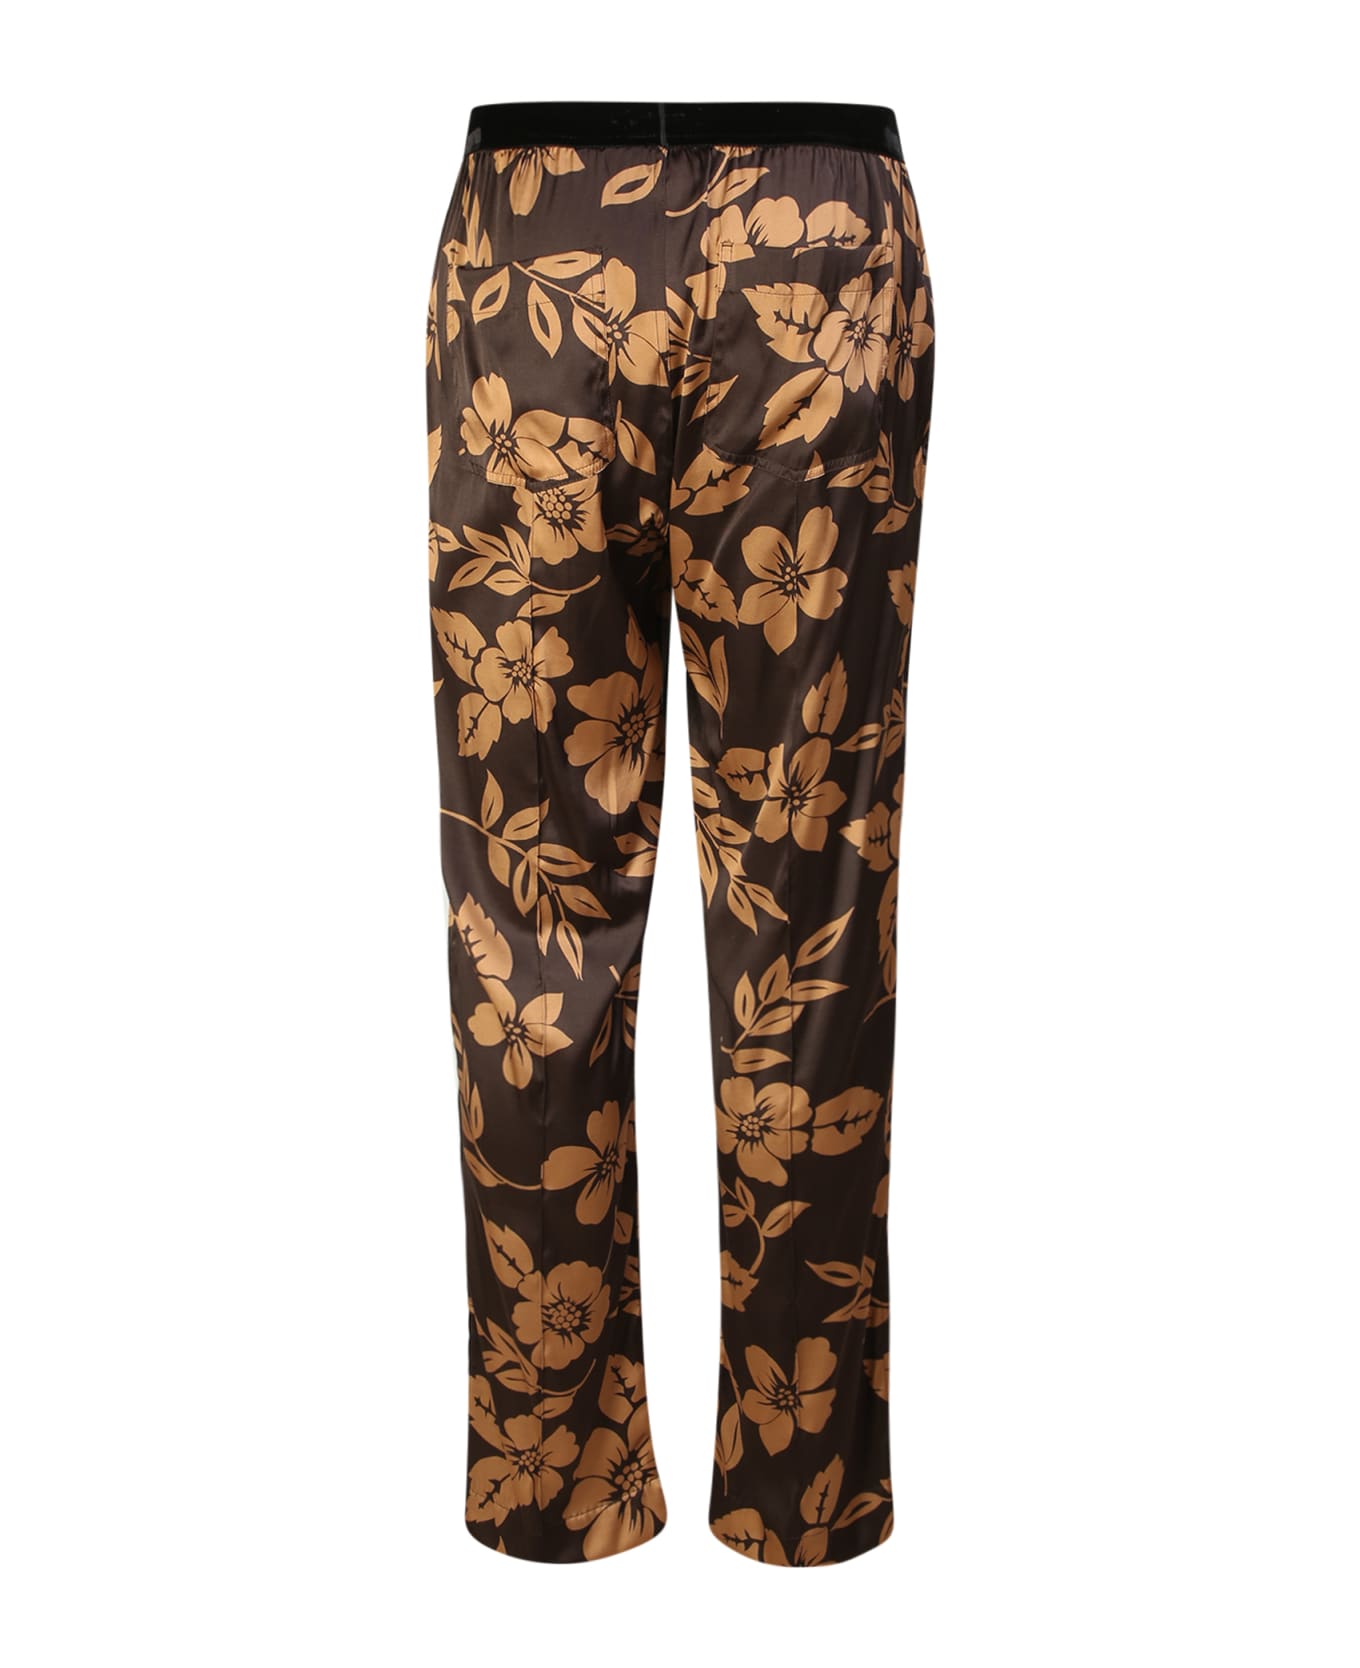 Tom Ford Multicolor Flower Trousers - Brown ボトムス